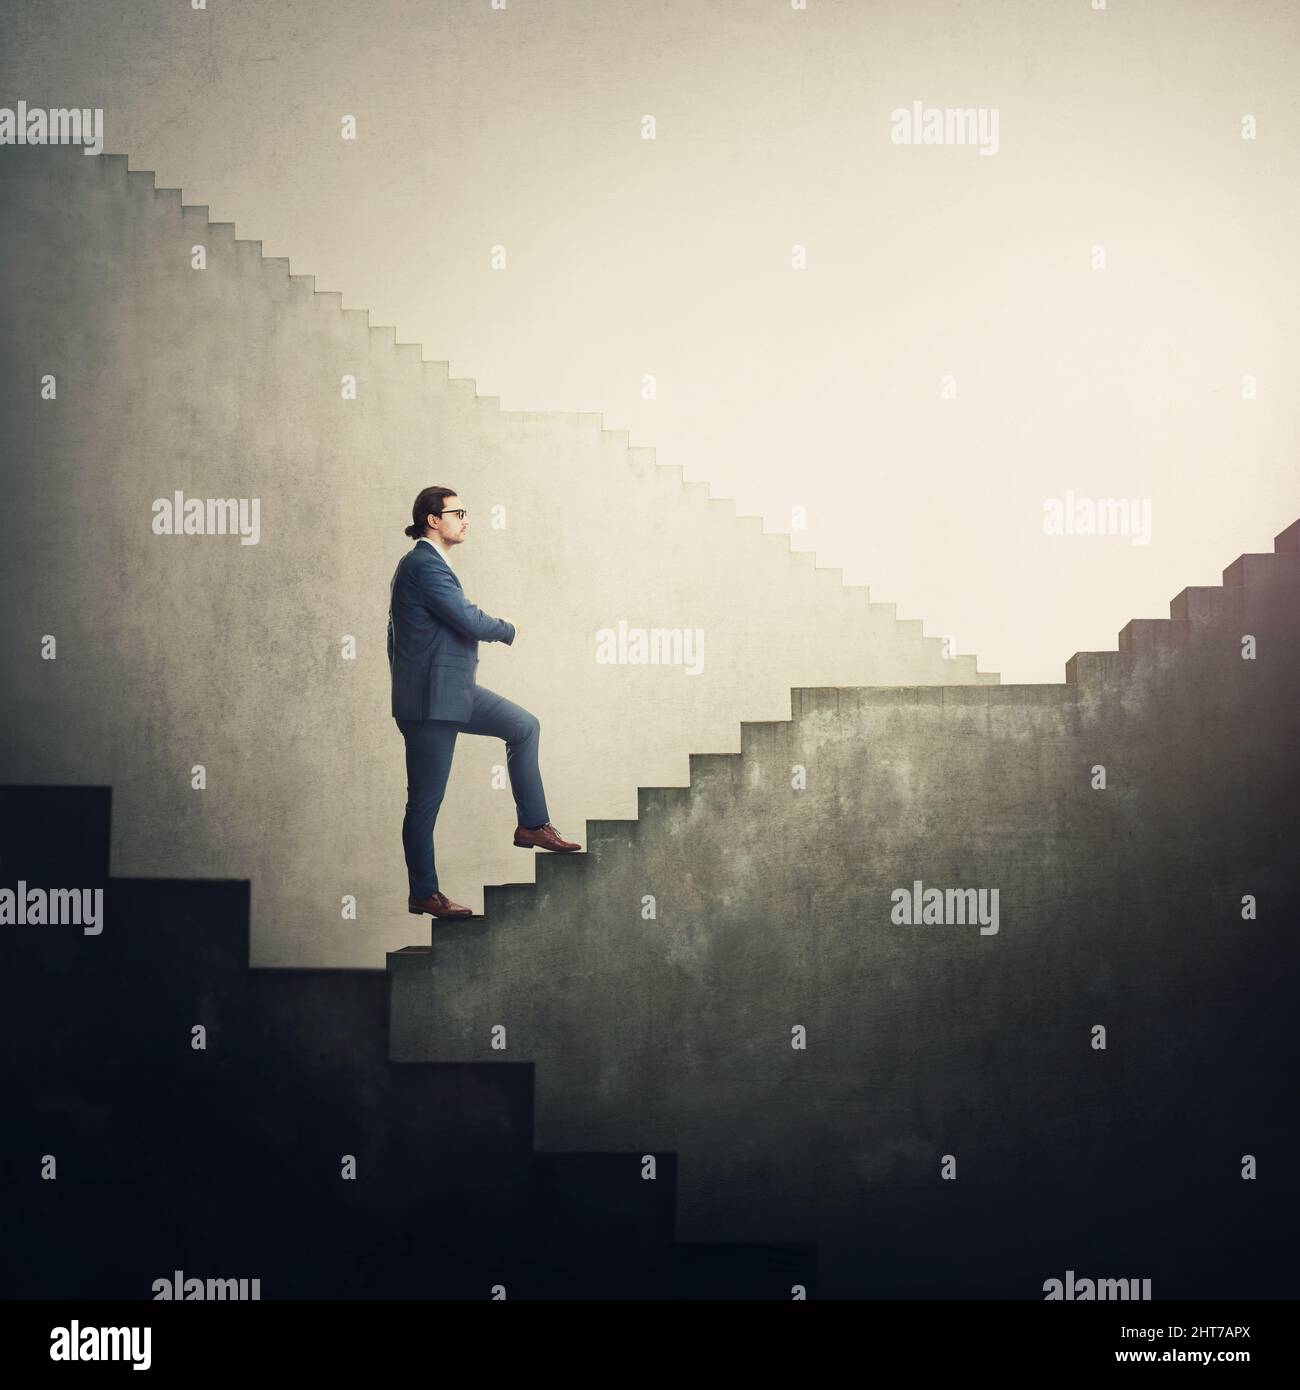 Confident businessman climbing an endless staircase with ups and downs, determined to reach the end and achieve success. Infinite stairway as business Stock Photo